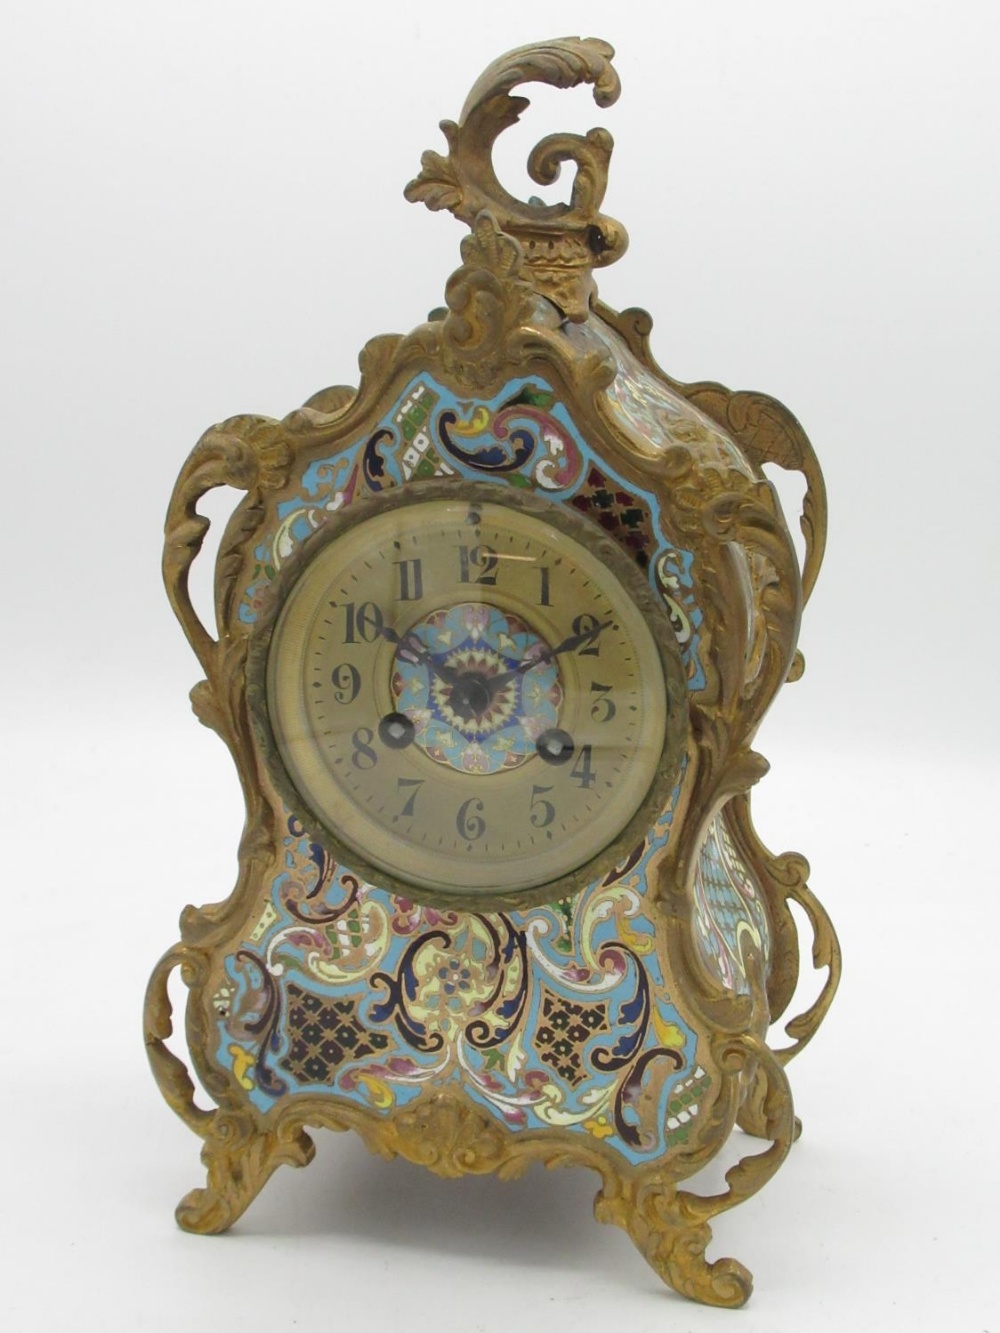 C20th French champlevé enamel and gilt metal rococo design clock, shaped case with scroll